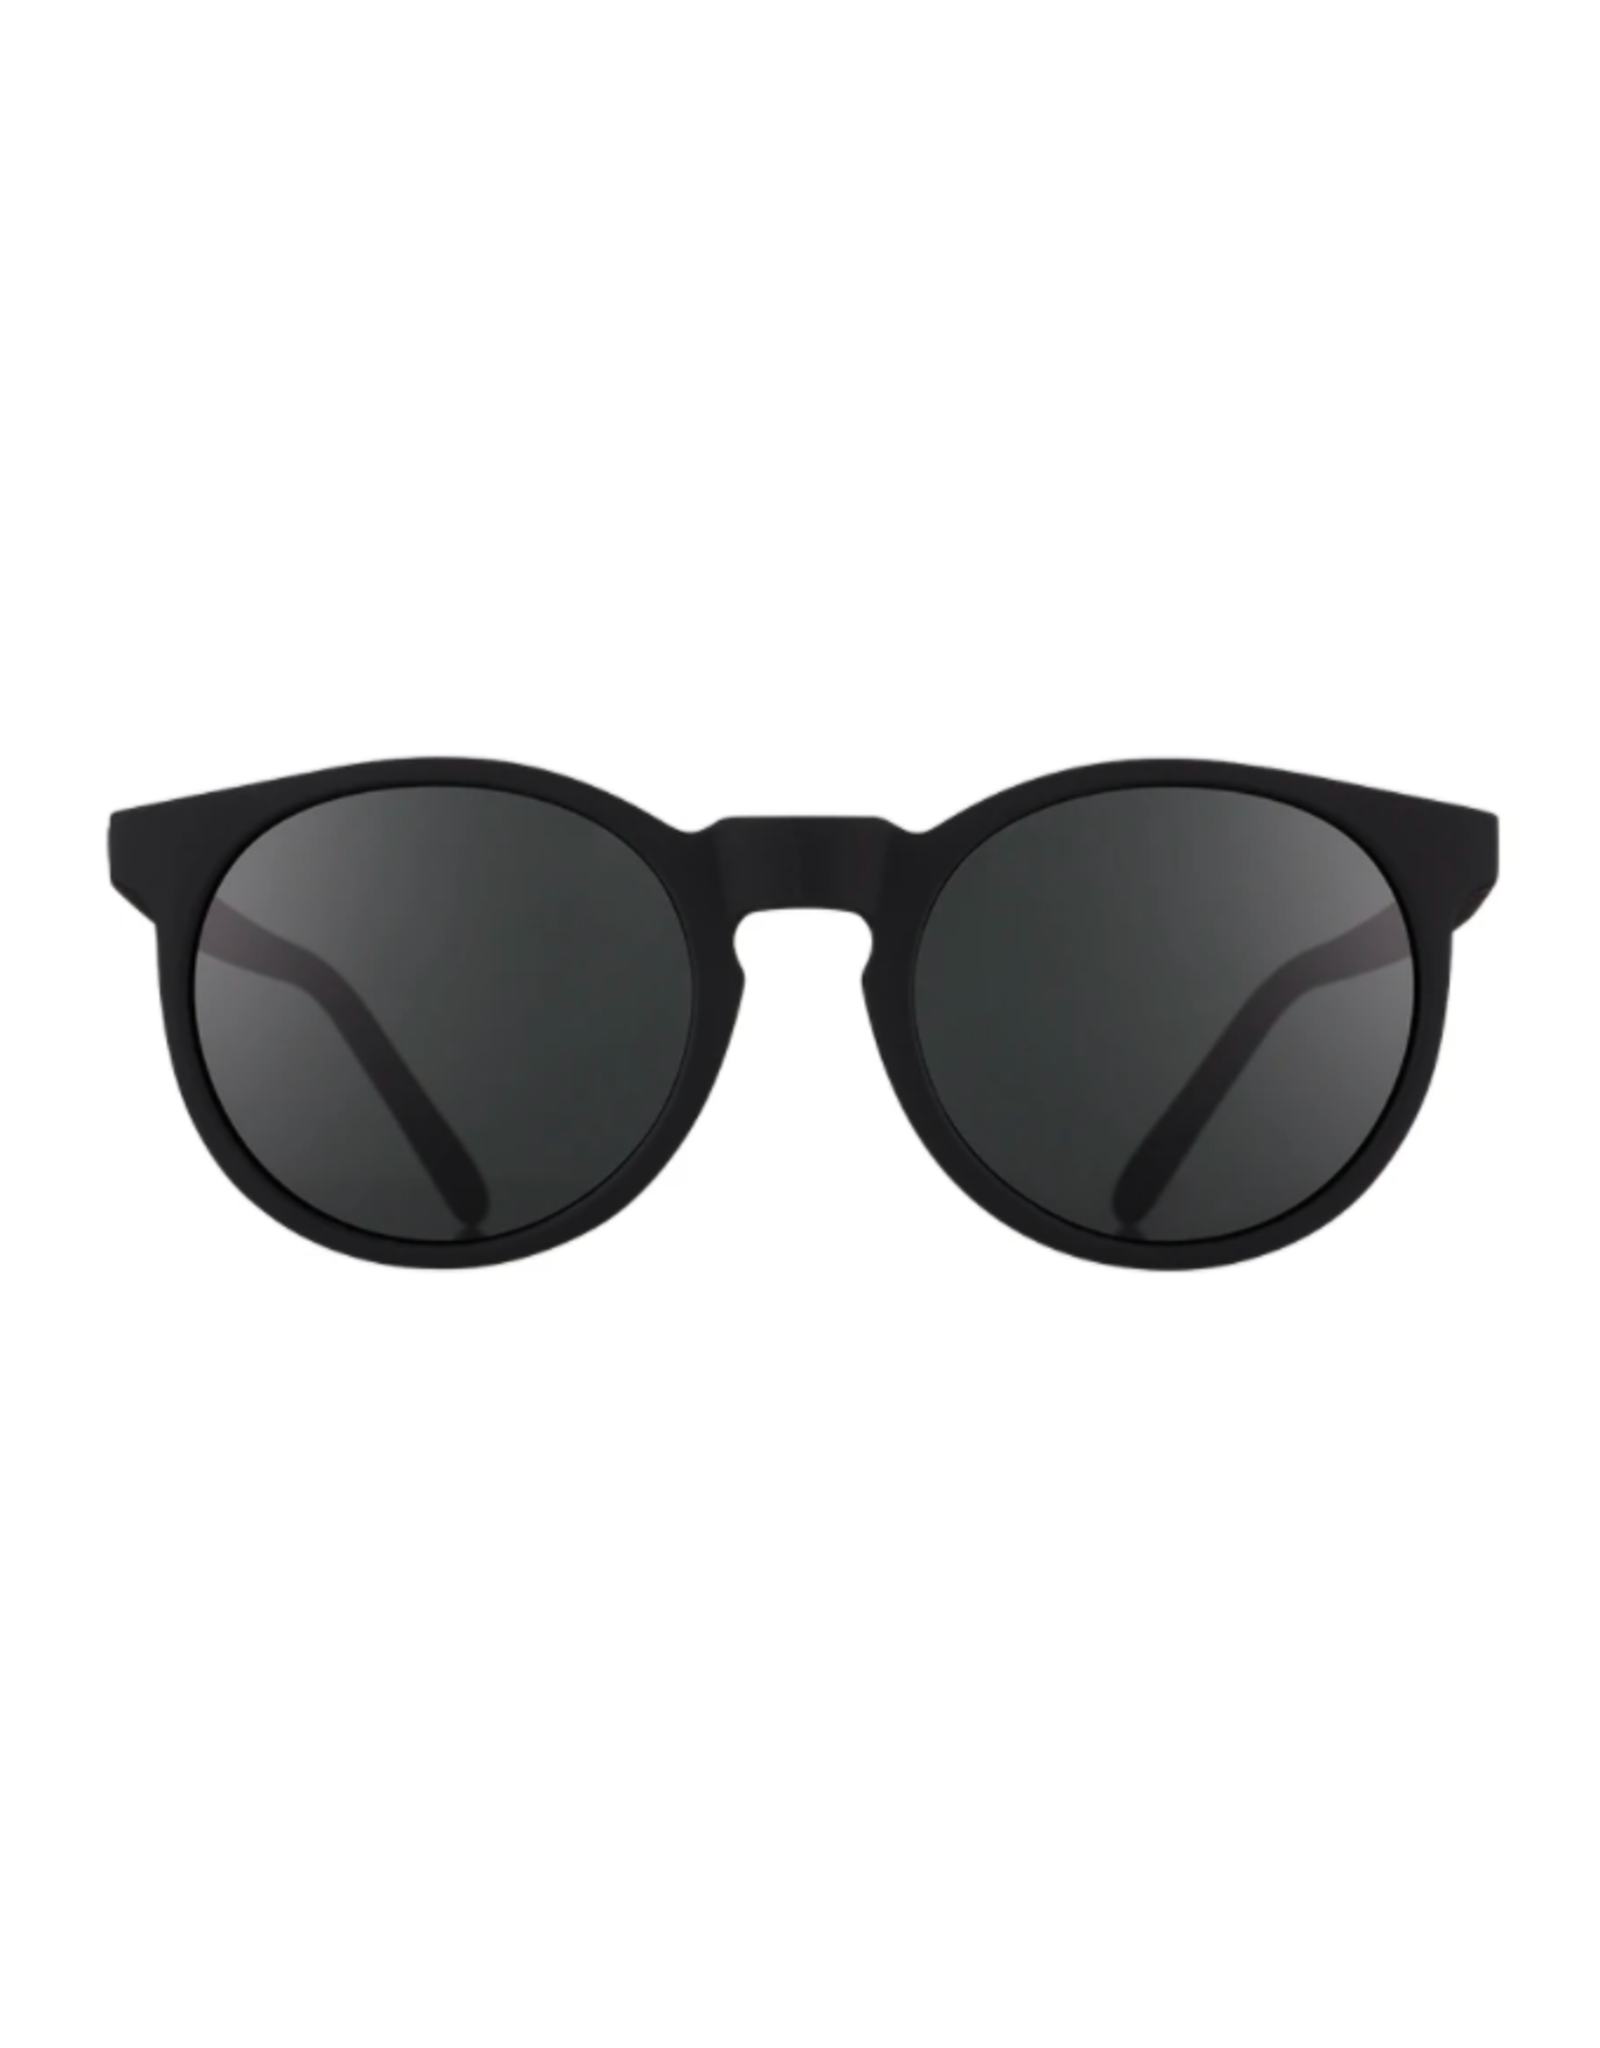 goodr Obsidian Round Sunglasses by goodr